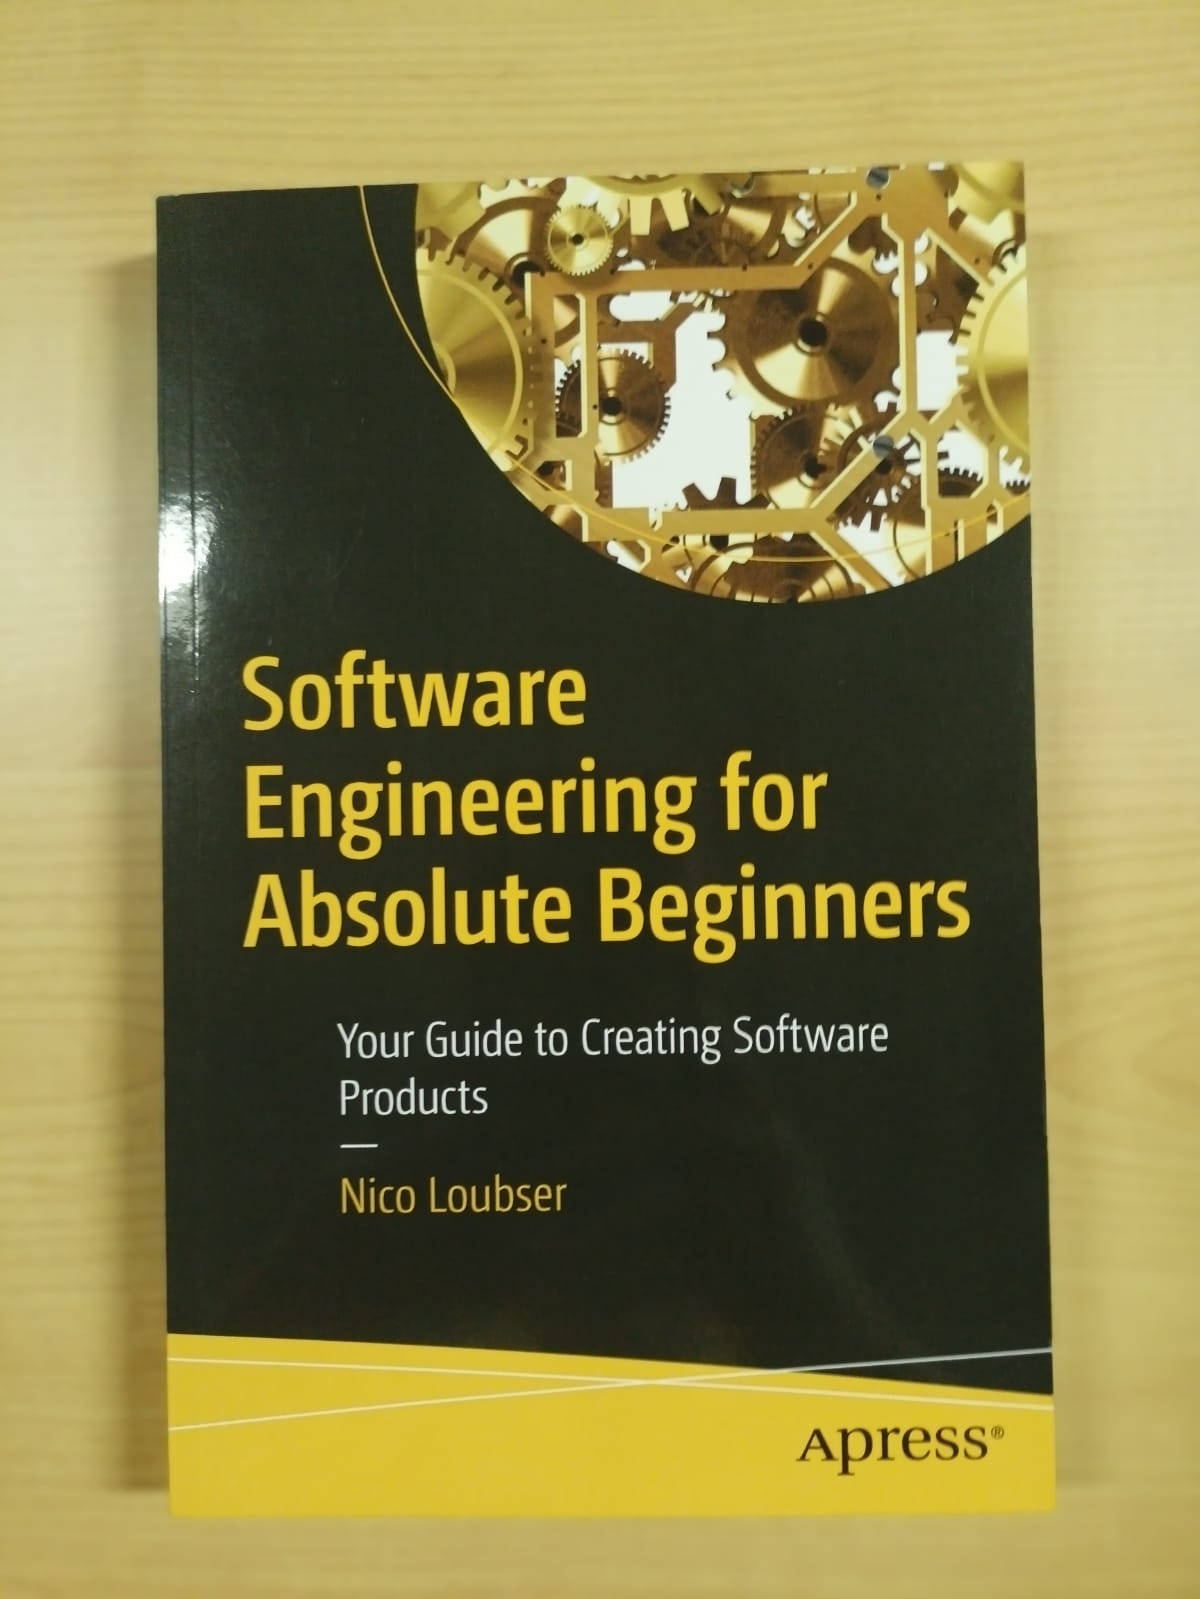 Sofware engineering for absolute beginners: your guide to creating software products